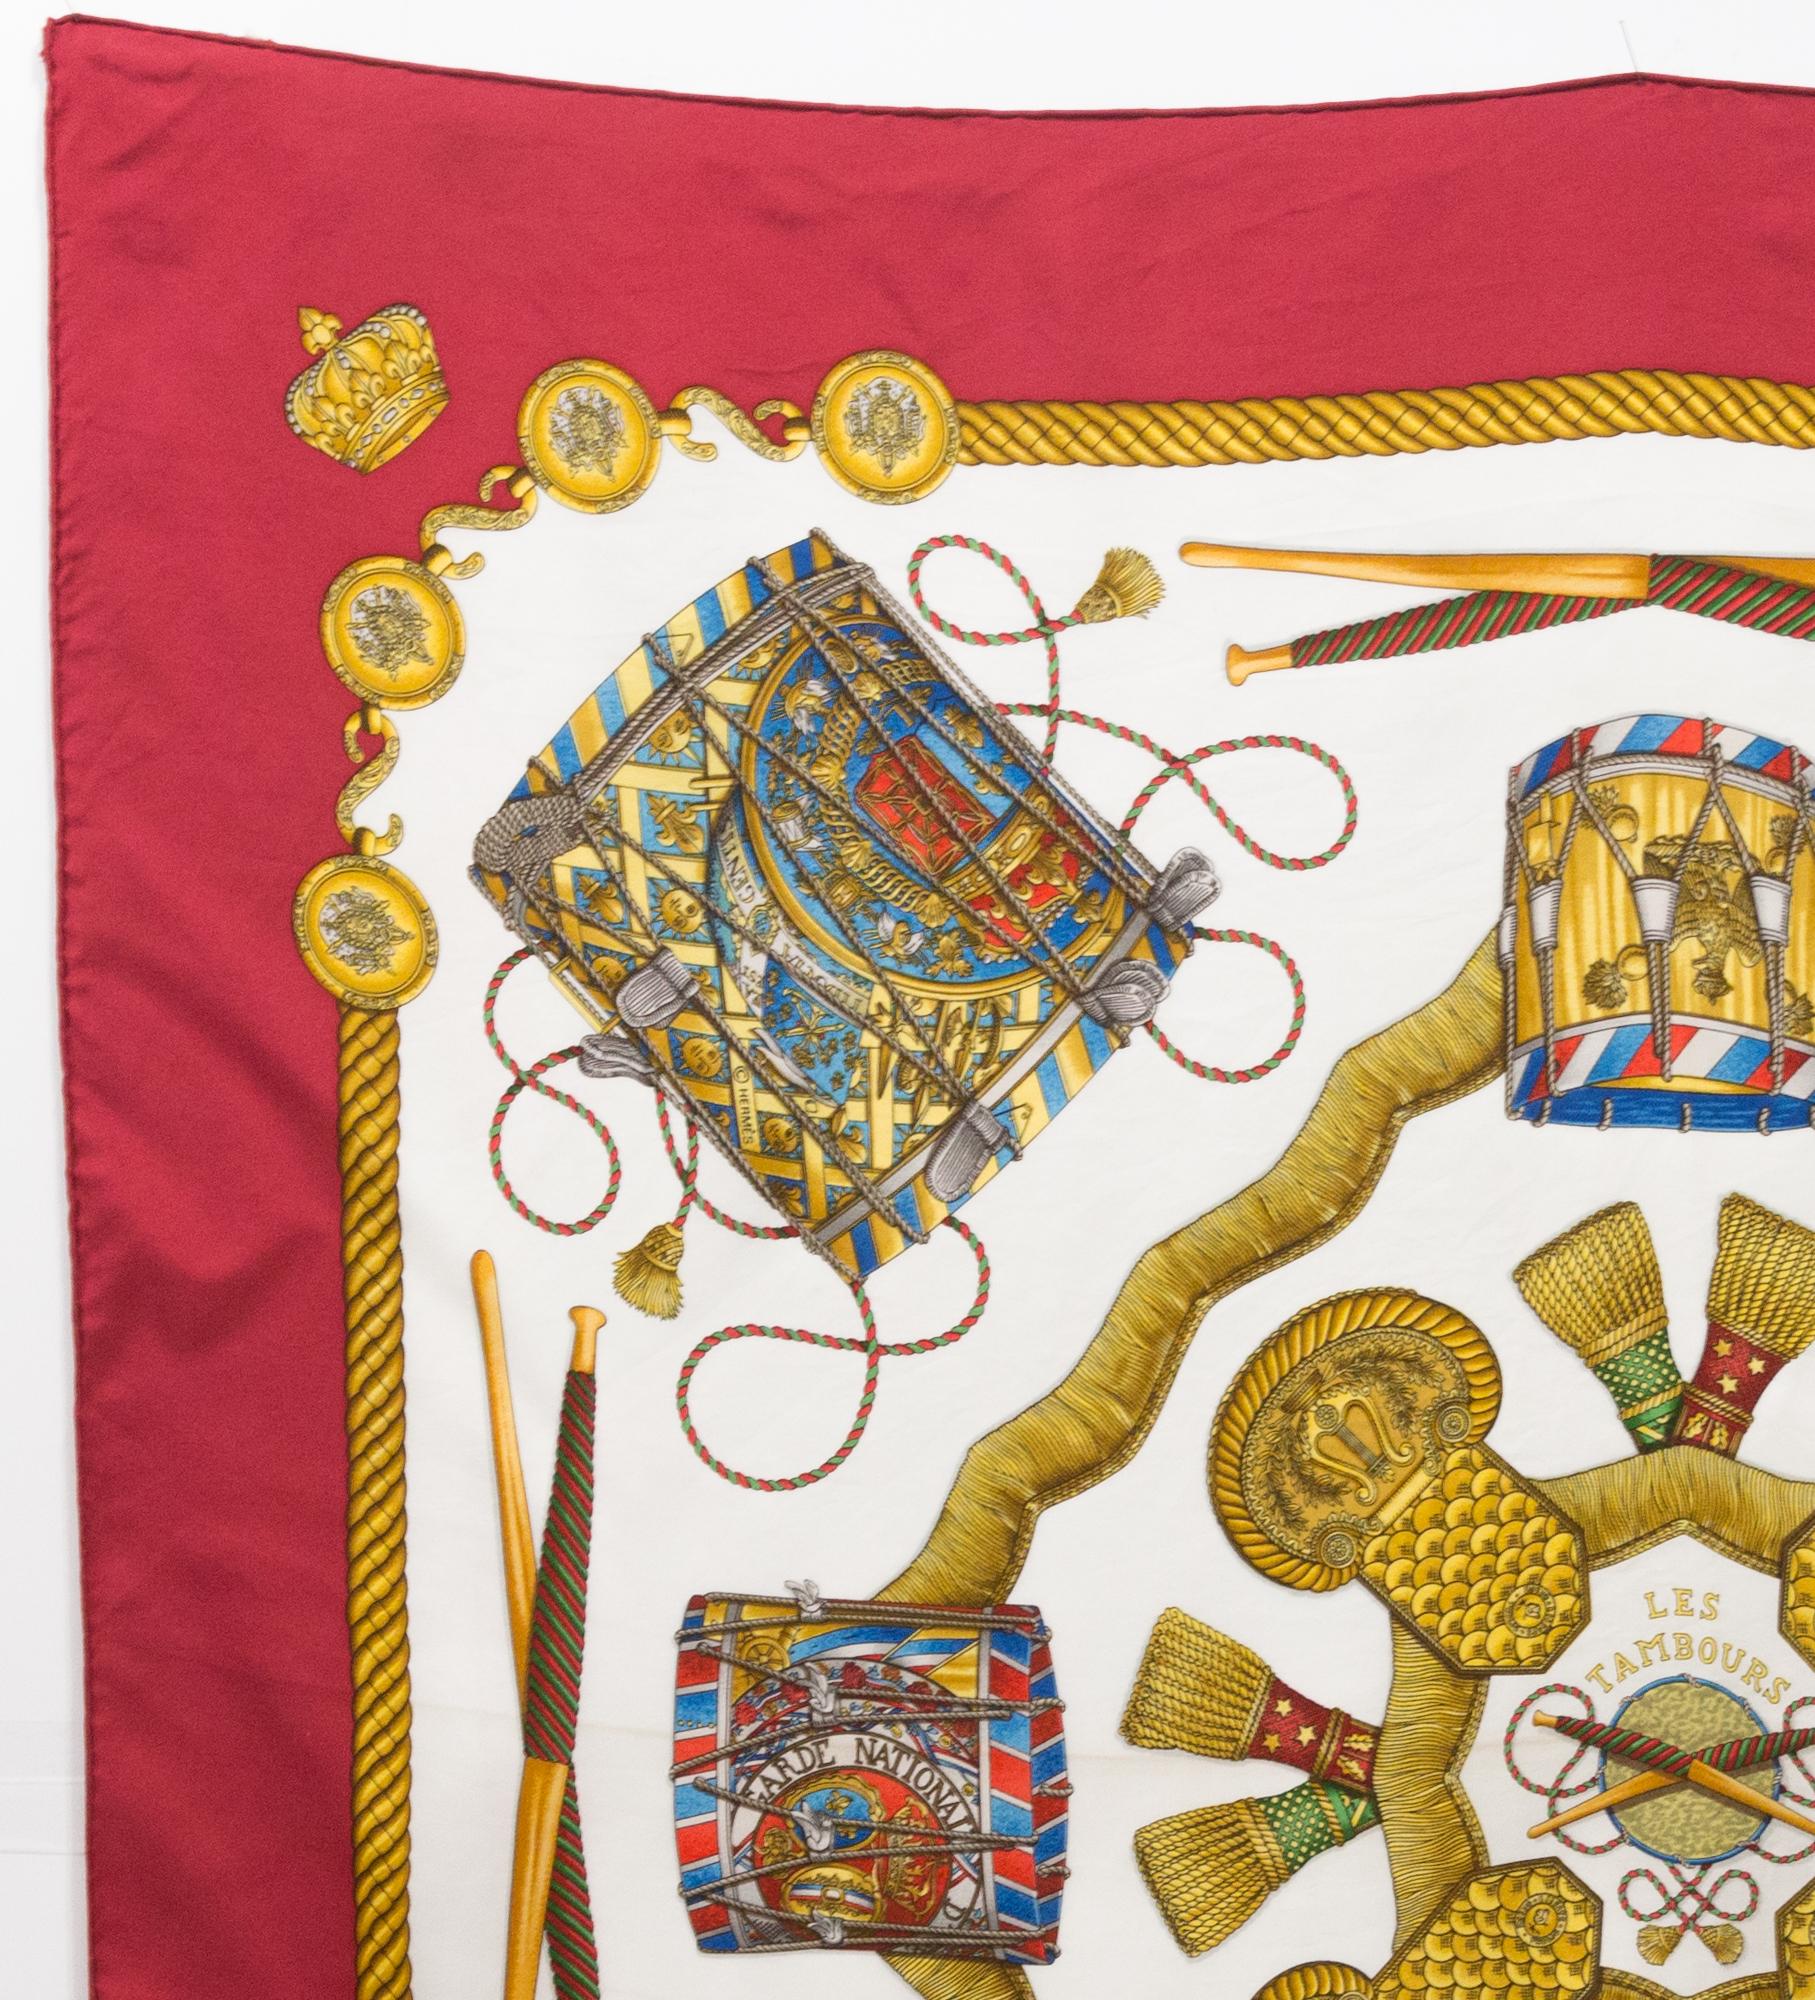 Hermes silk scarf « Les Tambours » by Joachim Metz  featuring a deep red border and a Hermès signature. 
Circa 1989
In good vintage condition. Made in France.
35,4in. (90cm)  X 35,4in. (90cm)
We guarantee you will receive this  iconic item as